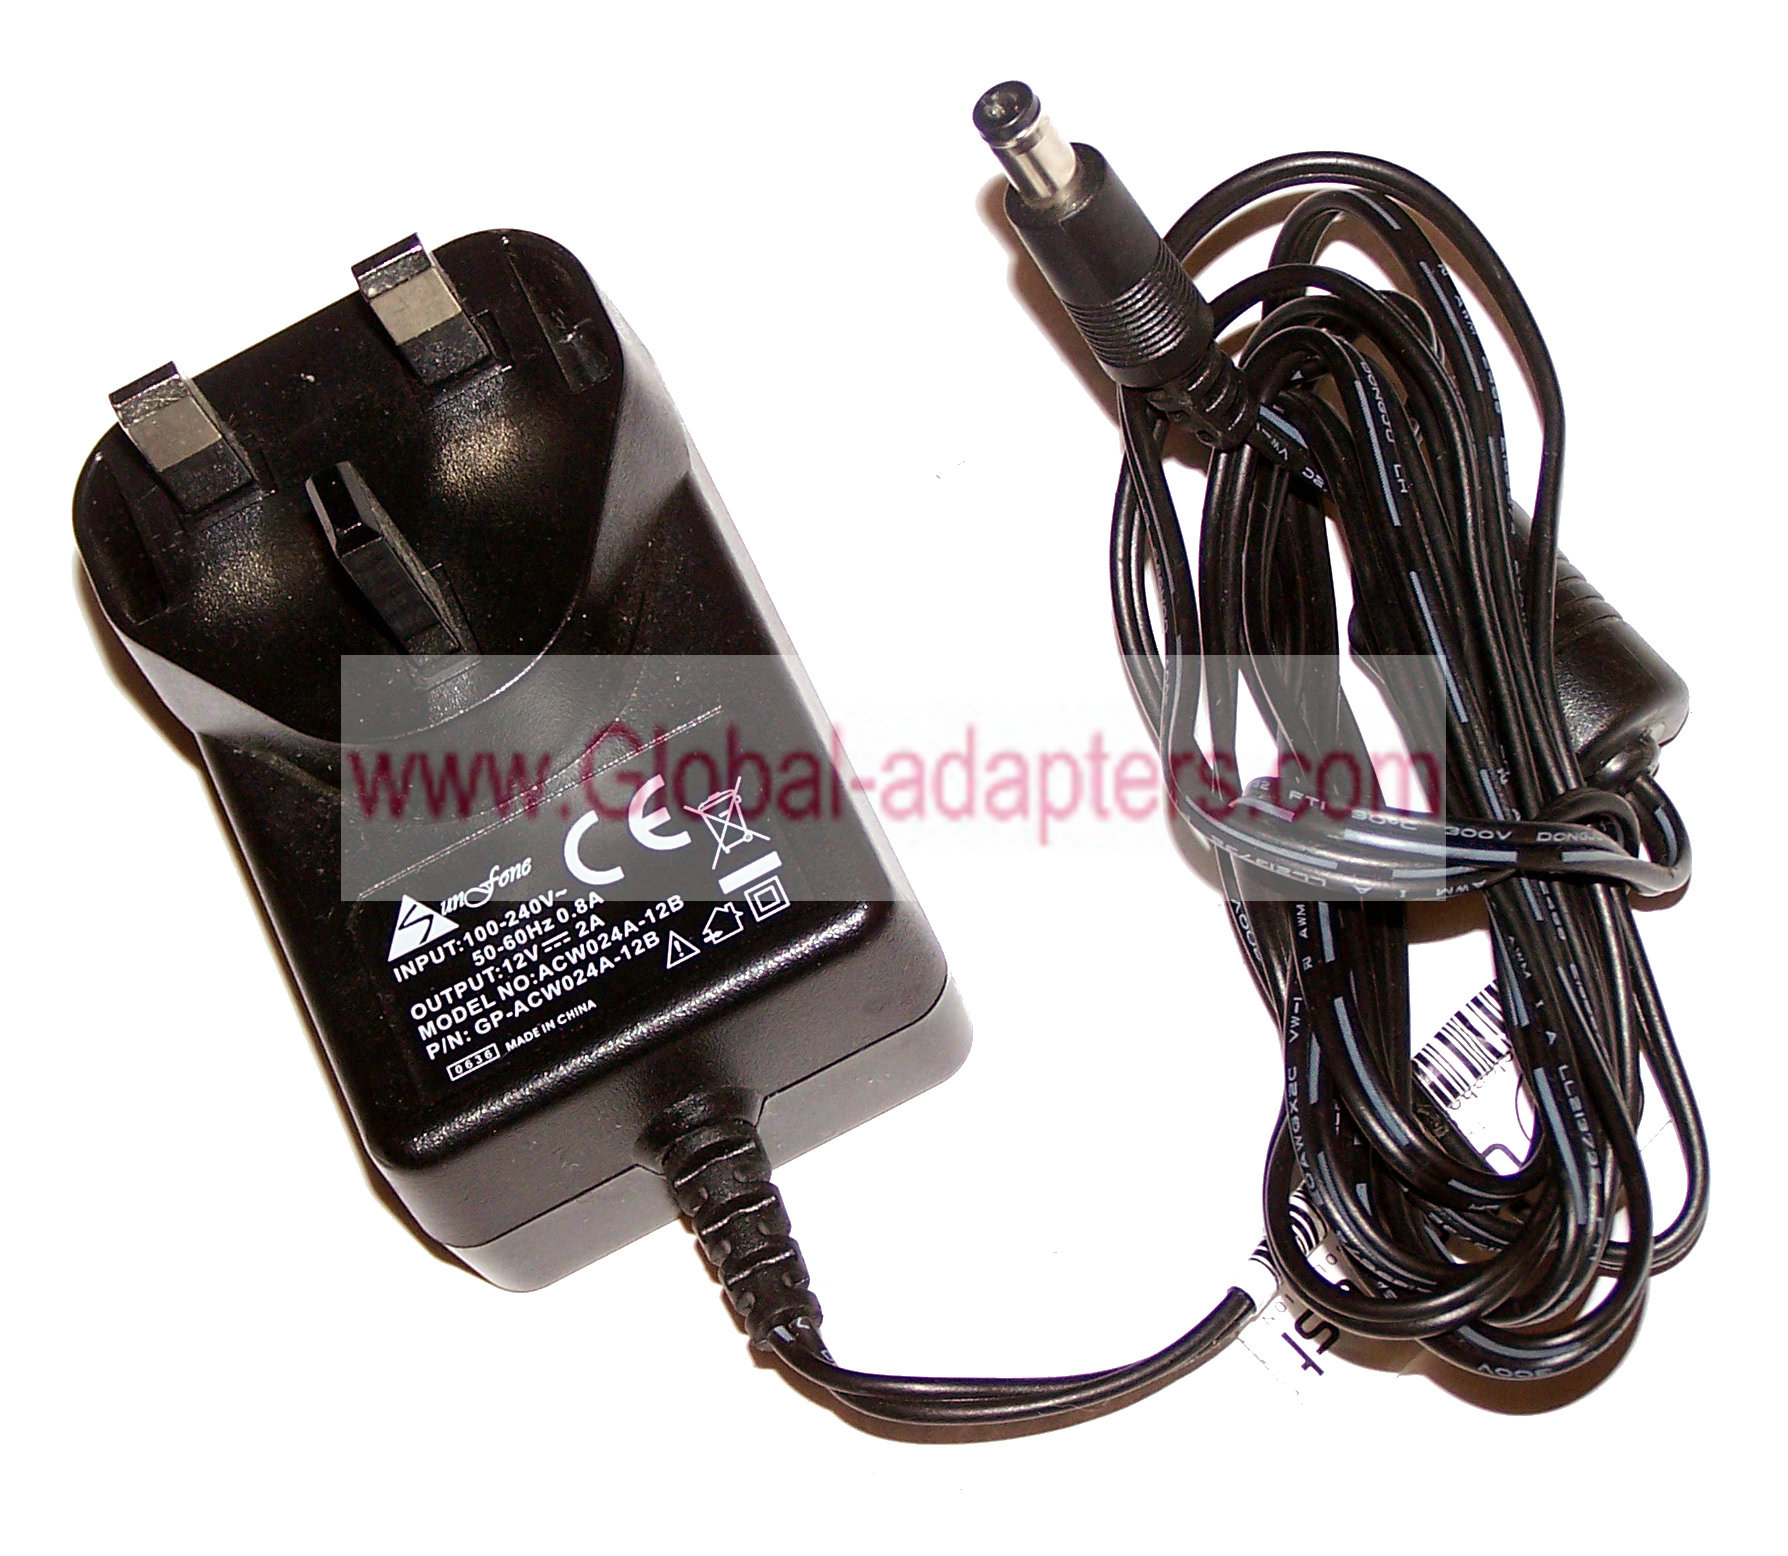 New Sunfone GP-ACW024A-12B 12VDC 2A ACW024A-12B UK AC Adapter with Barrel Connector